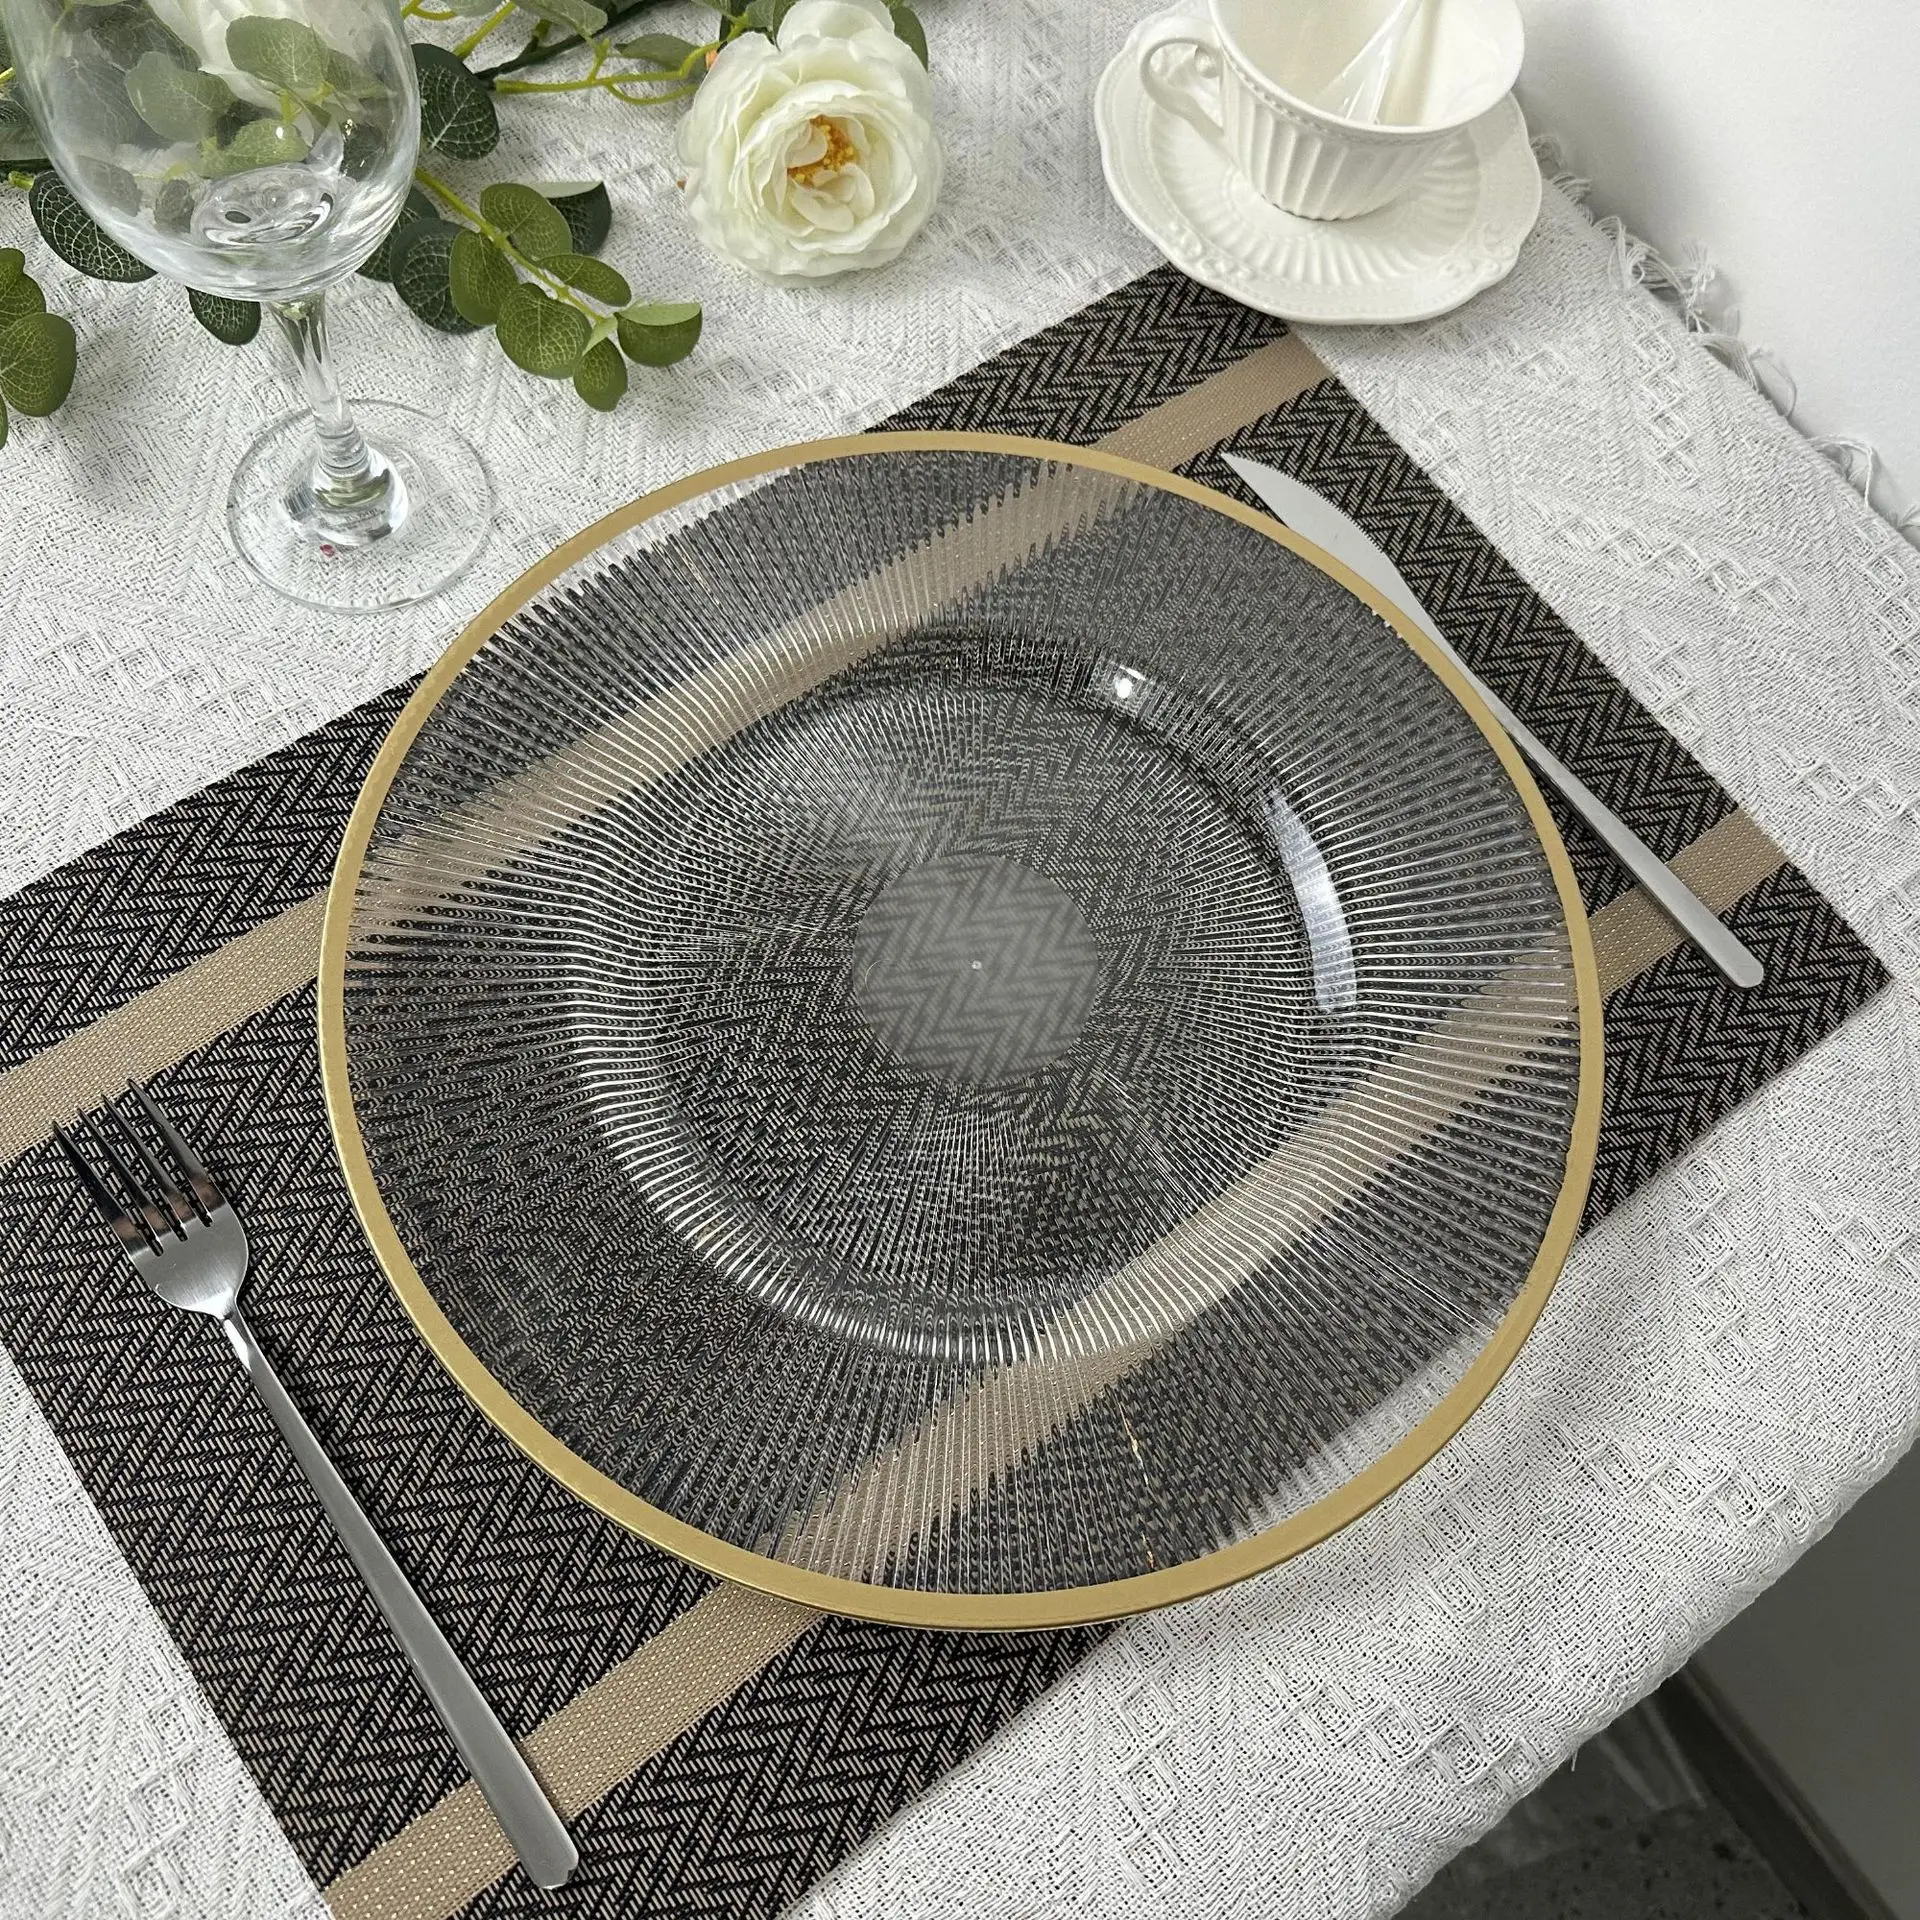 

Clear Charger Plates 13 Inch Plastic Round Dinner Plate with Gold Rim Dinner Table Decorative Plate for Wedding Birthday Brida